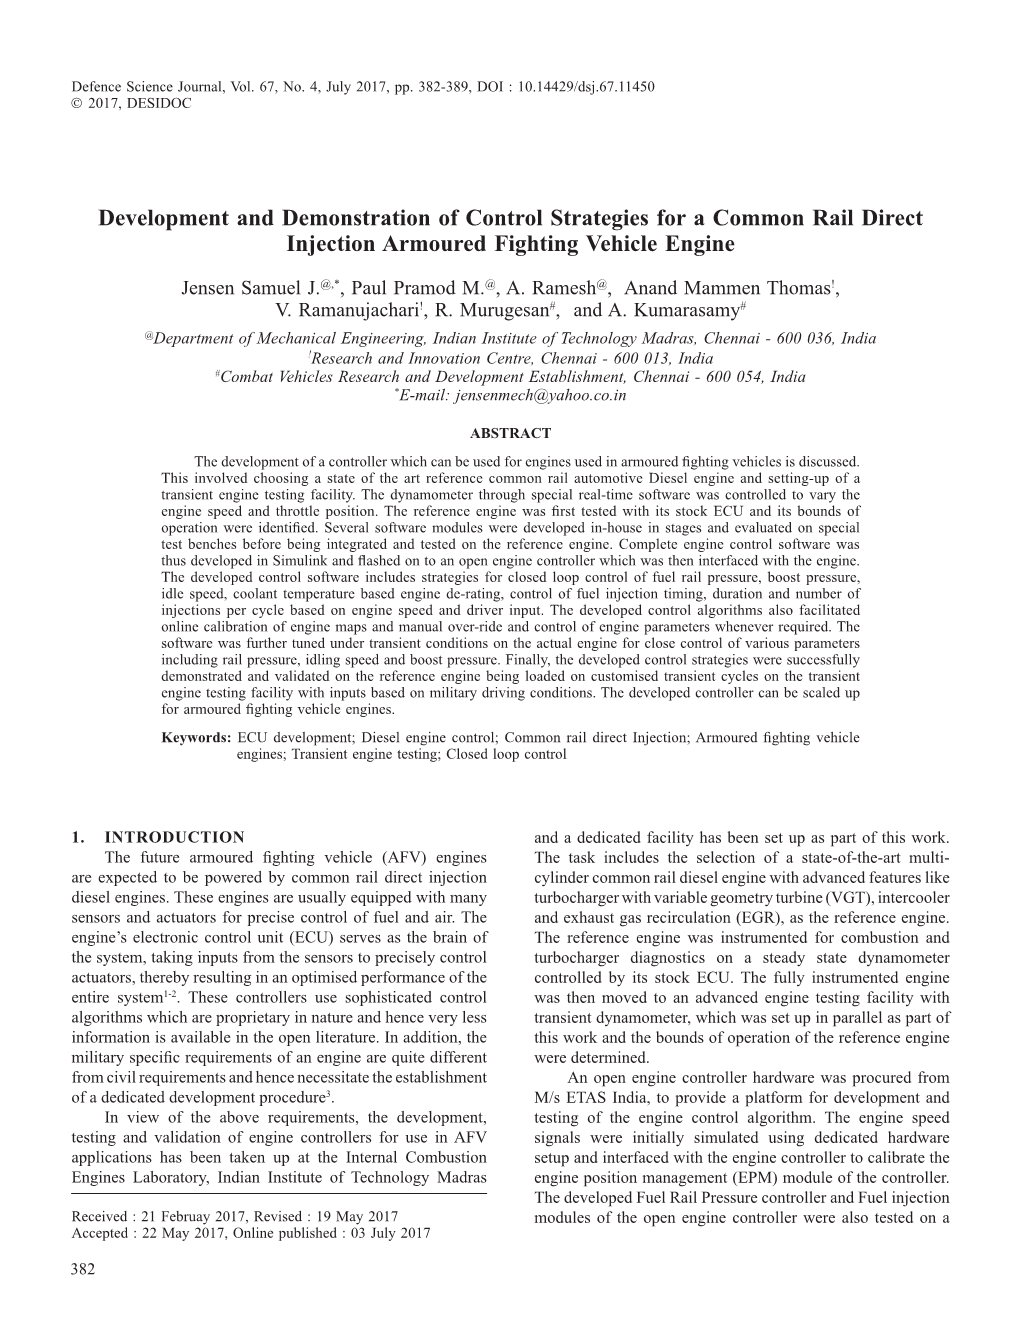 Development and Demonstration of Control Strategies for a Common Rail Direct Injection Armoured Fighting Vehicle Engine